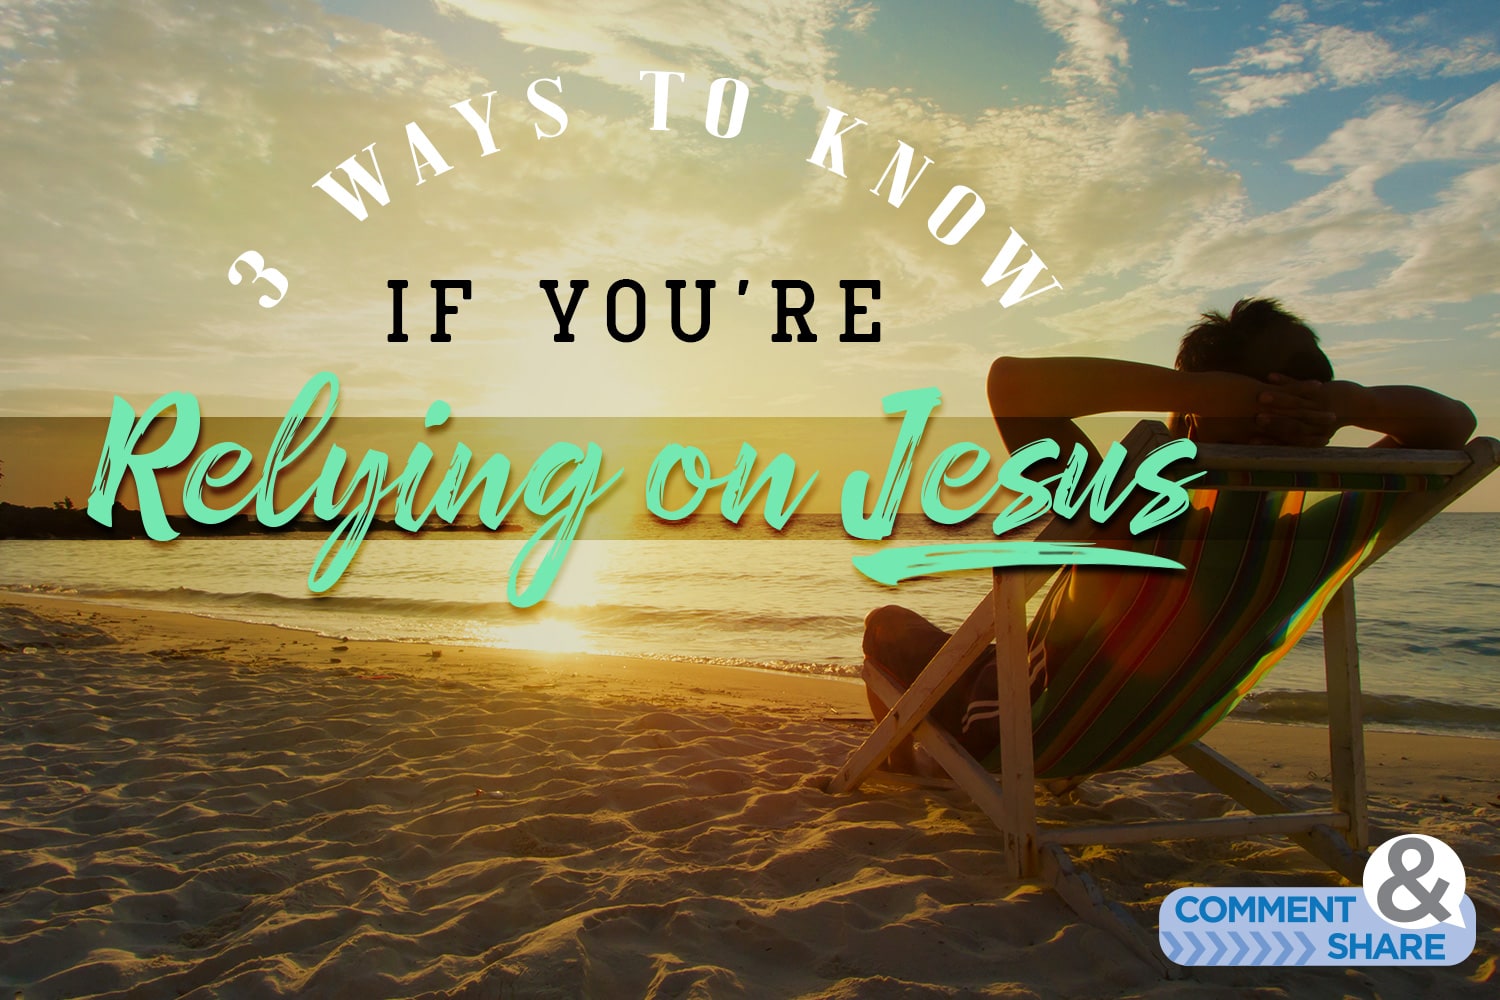 3 Ways to Know if You're Relying on Jesus